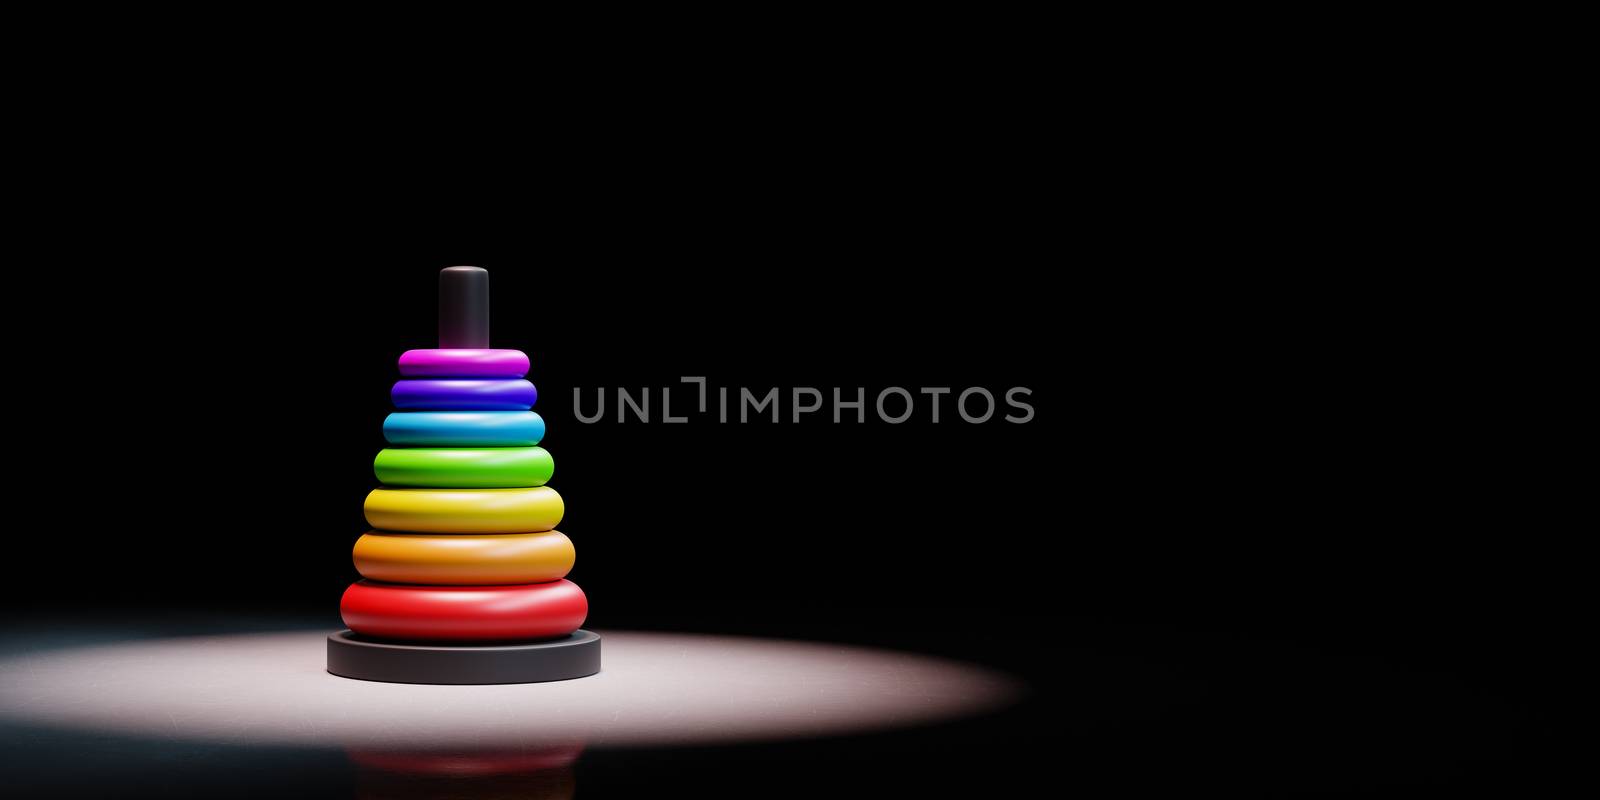 Stack of Colorful Plastic Disks in Ascending Order Spotlighted on Black Background with Copy Space 3D Illustration